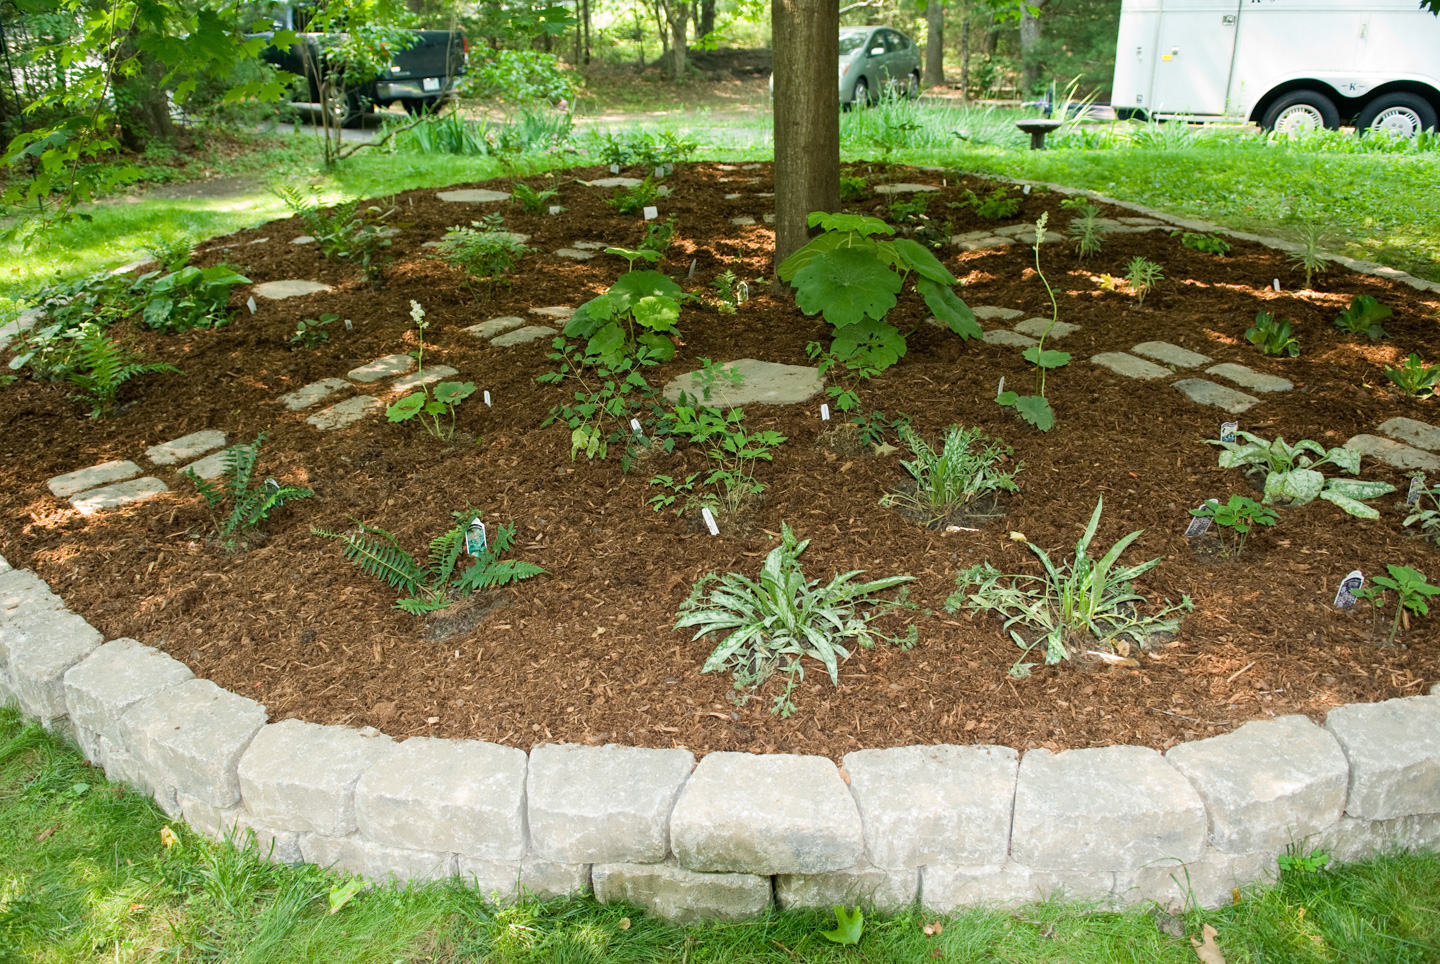 Shade garden with plants and stepping stones